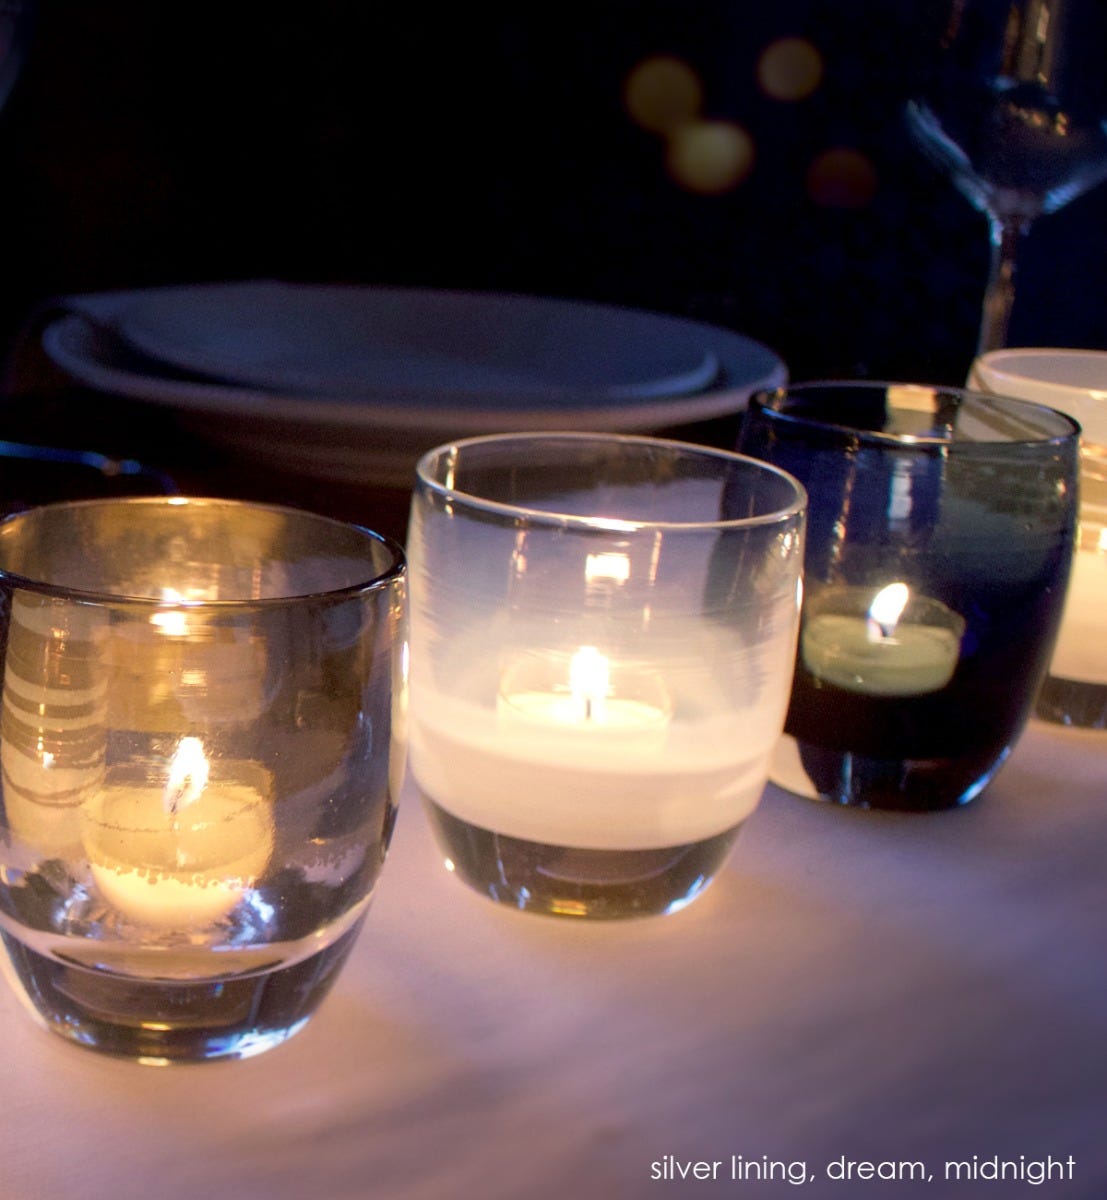 midnight dark blue hand-blown glass votive candle holder. Paired with silver lining and dream.